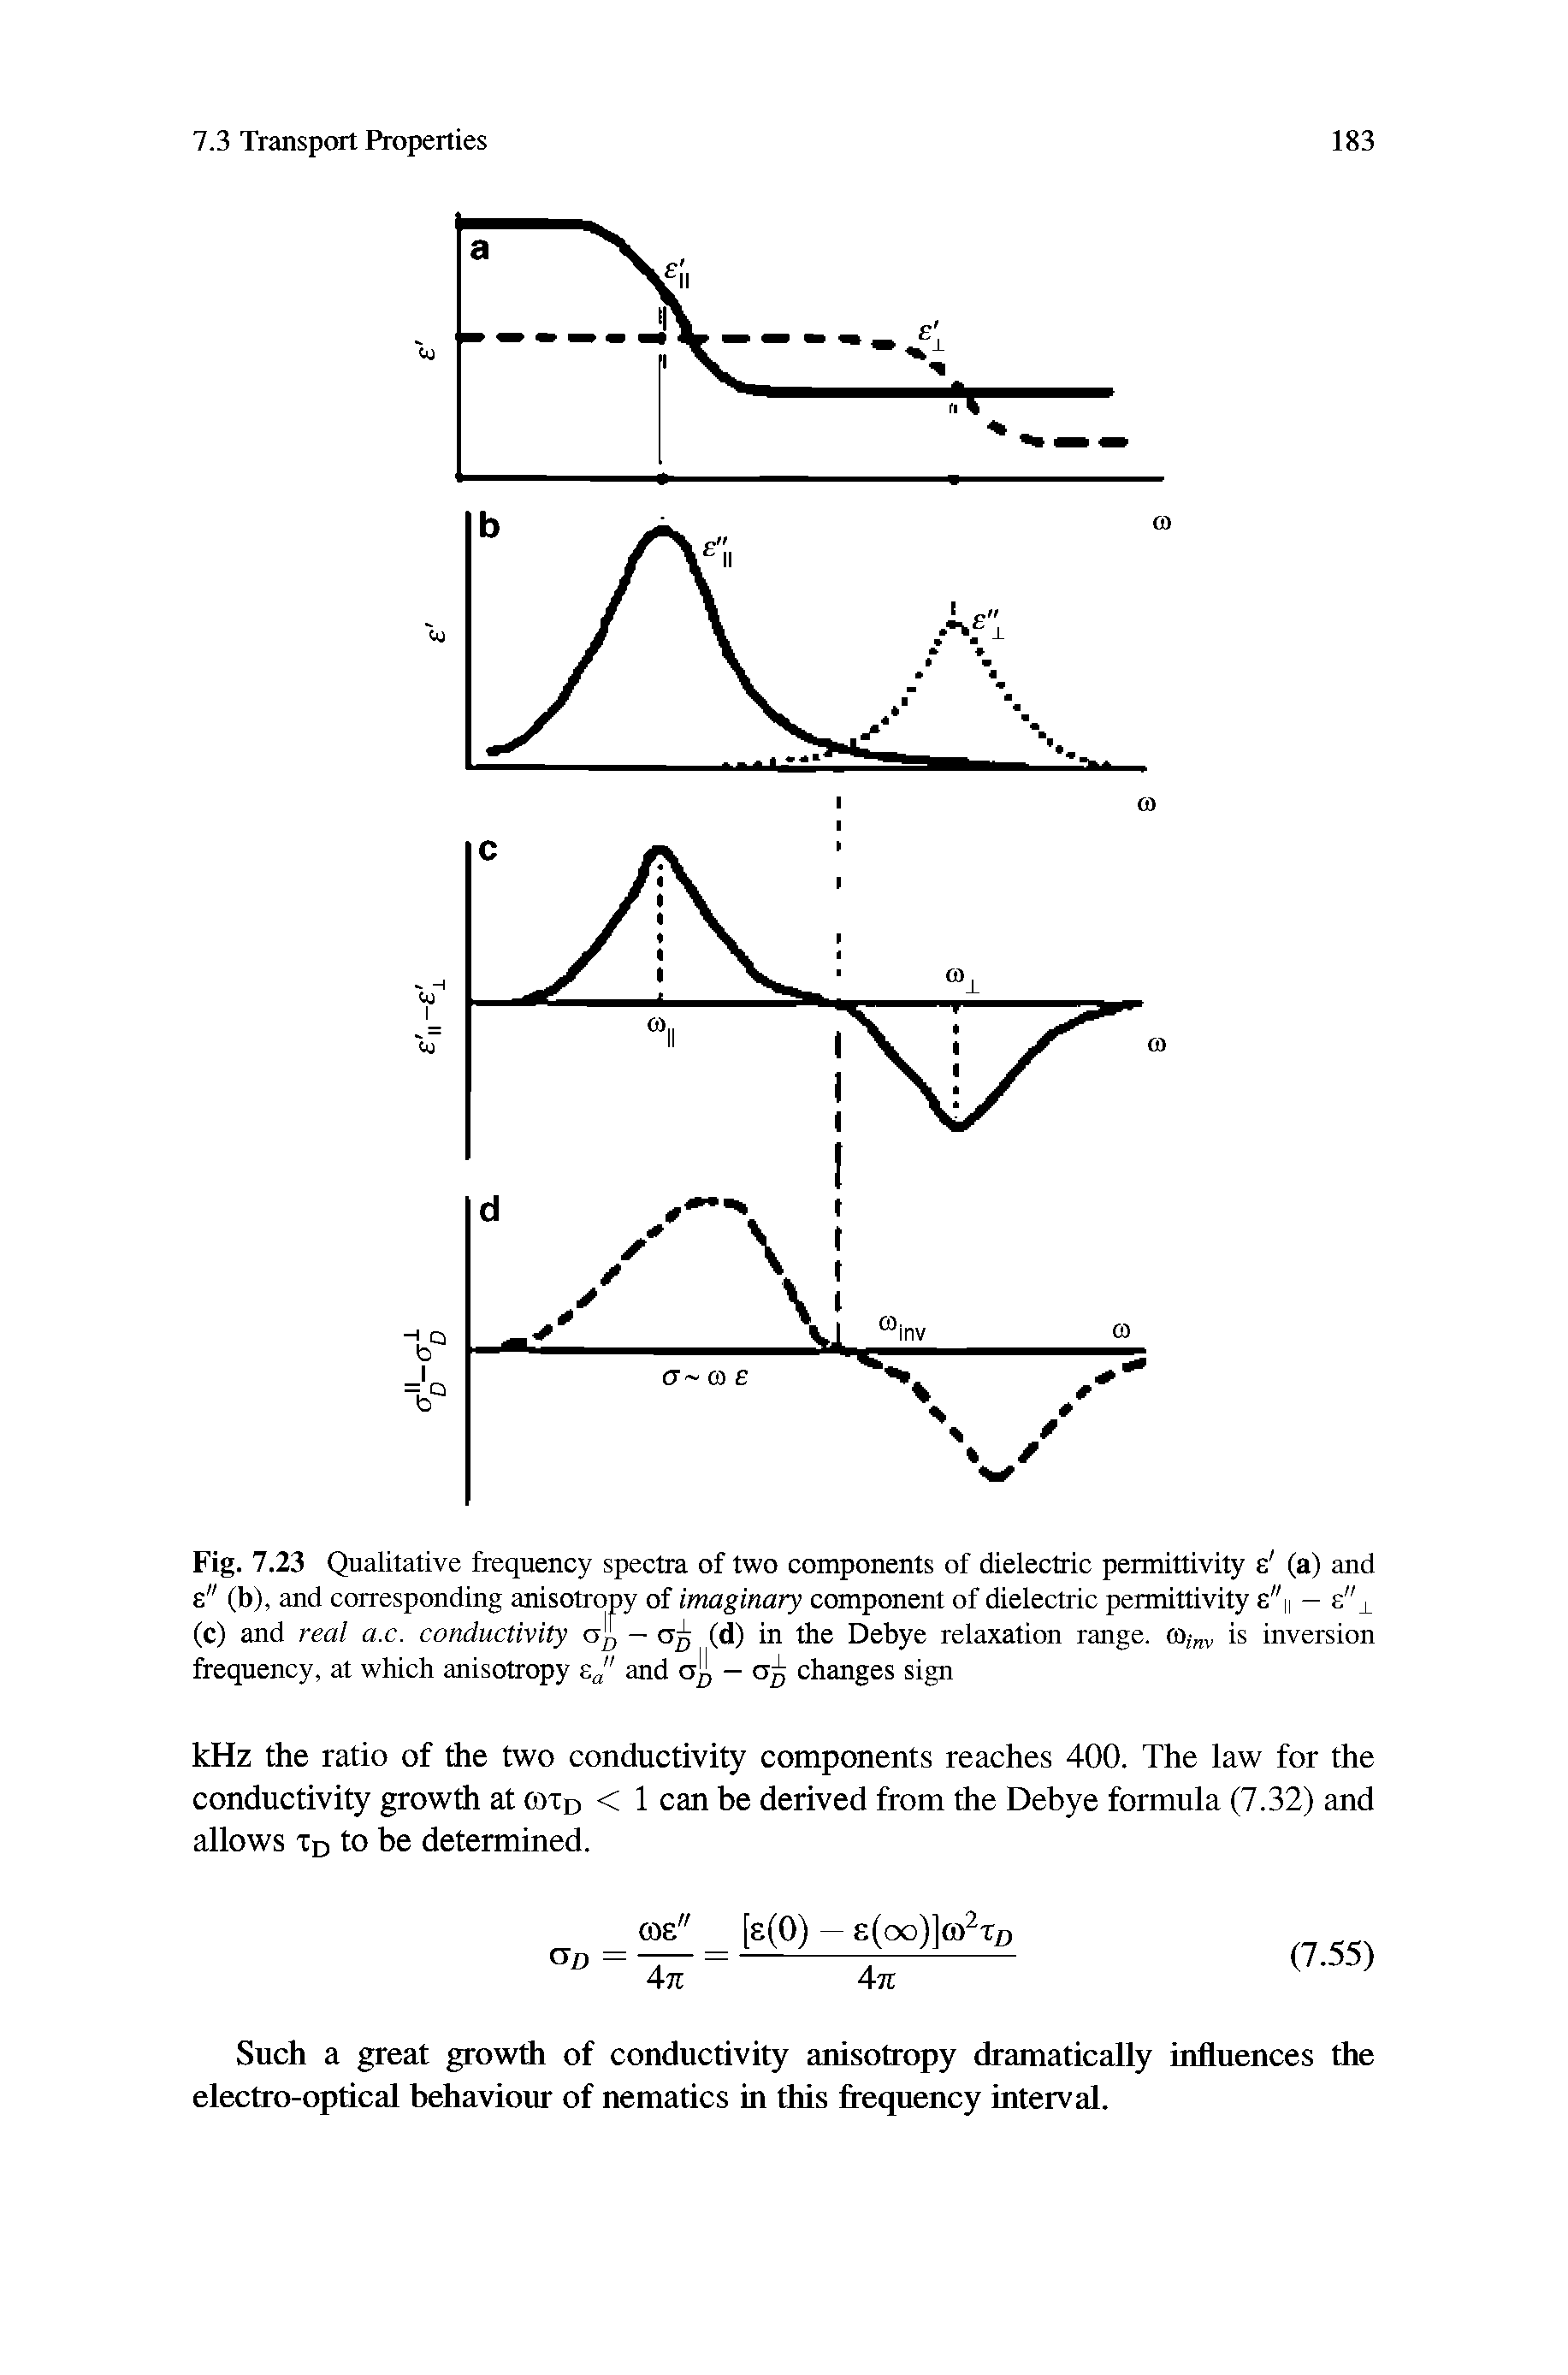 Fig. 7.23 Qualitative frequency spectra of two components of dielectric permittivity e (a) and e" (b), and corresponding anisotropy of imaginary component of dielectric permittivity e"n — e" (c) and real a.c. conductivity af — (d) in the Debye relaxation range. ), v is inversion...